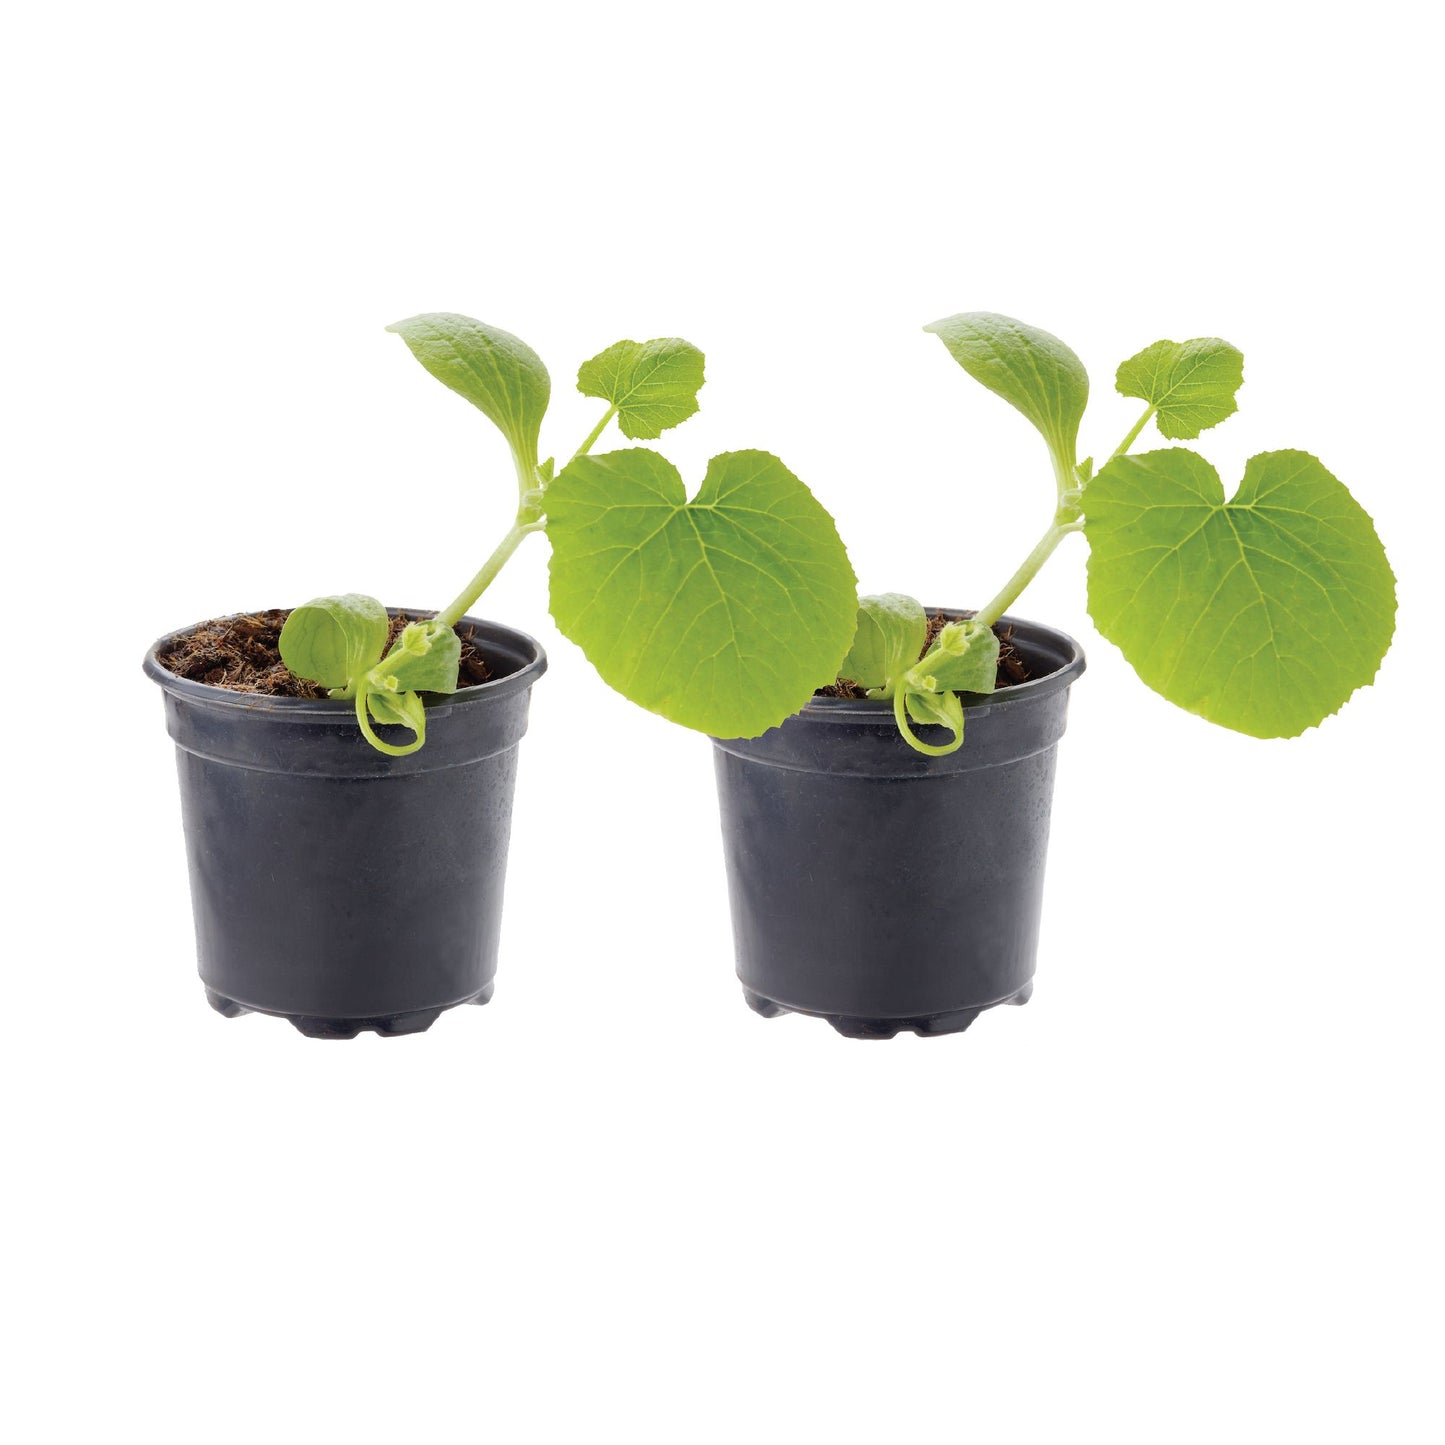 Cantaloupe Hale's Best Jumbo Plantlings Live Baby Plants 4in. Pot, 2-Pack